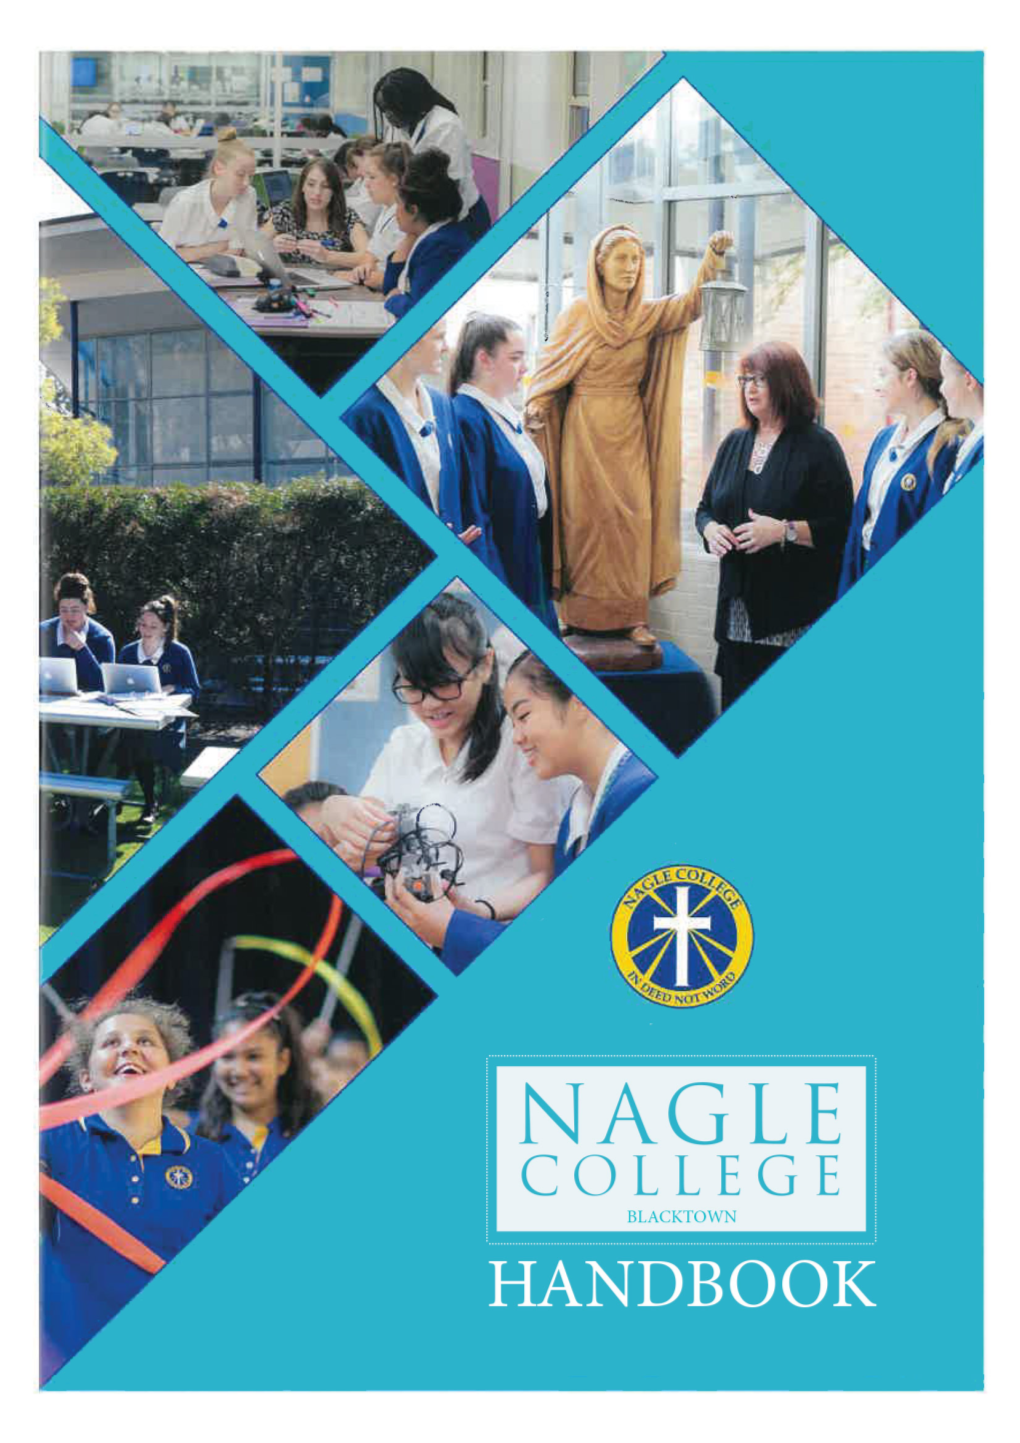 Nagle College Blacktown 1 Welcome to Nagle College